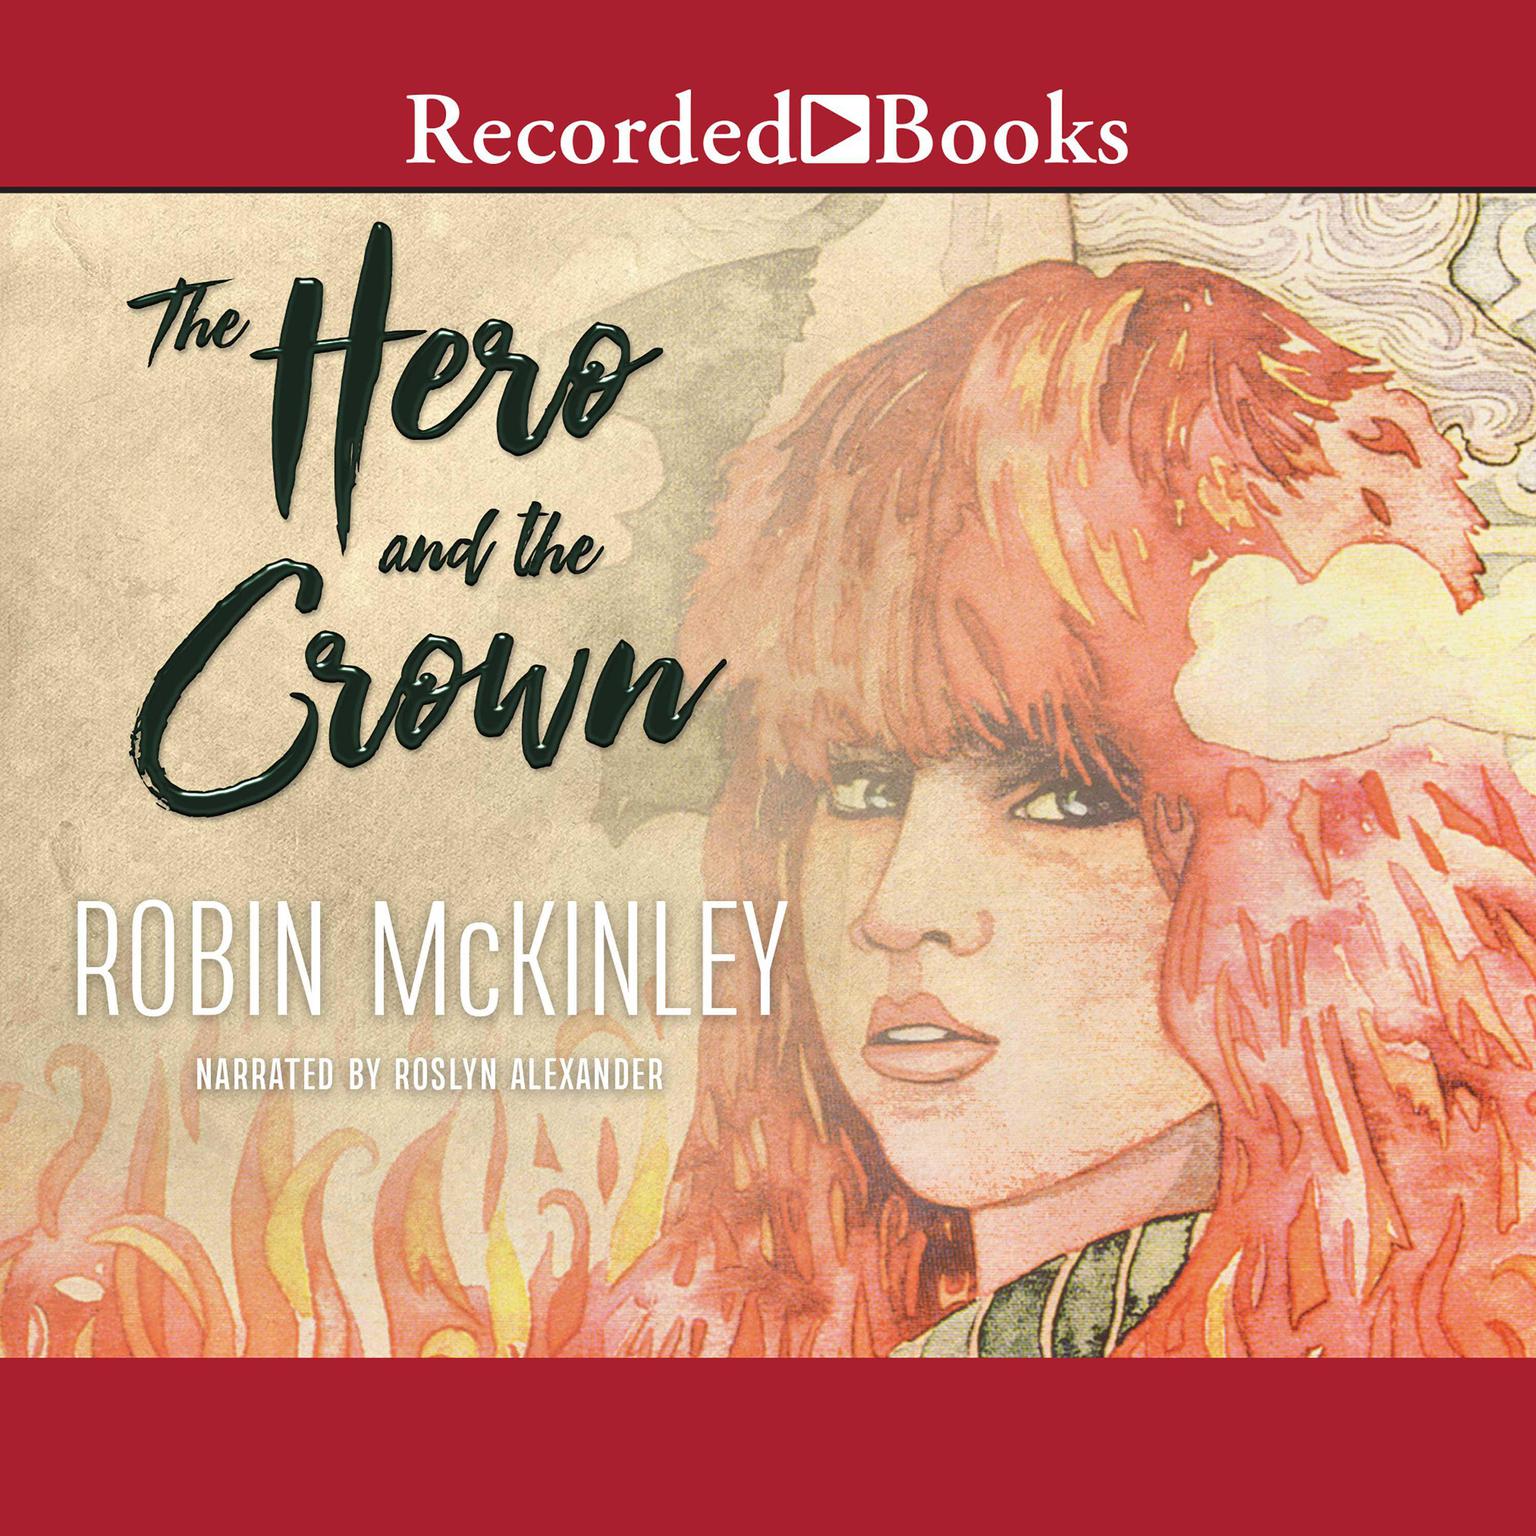 Robin McKinley: The Hero and the Crown (1987, Ace Books)